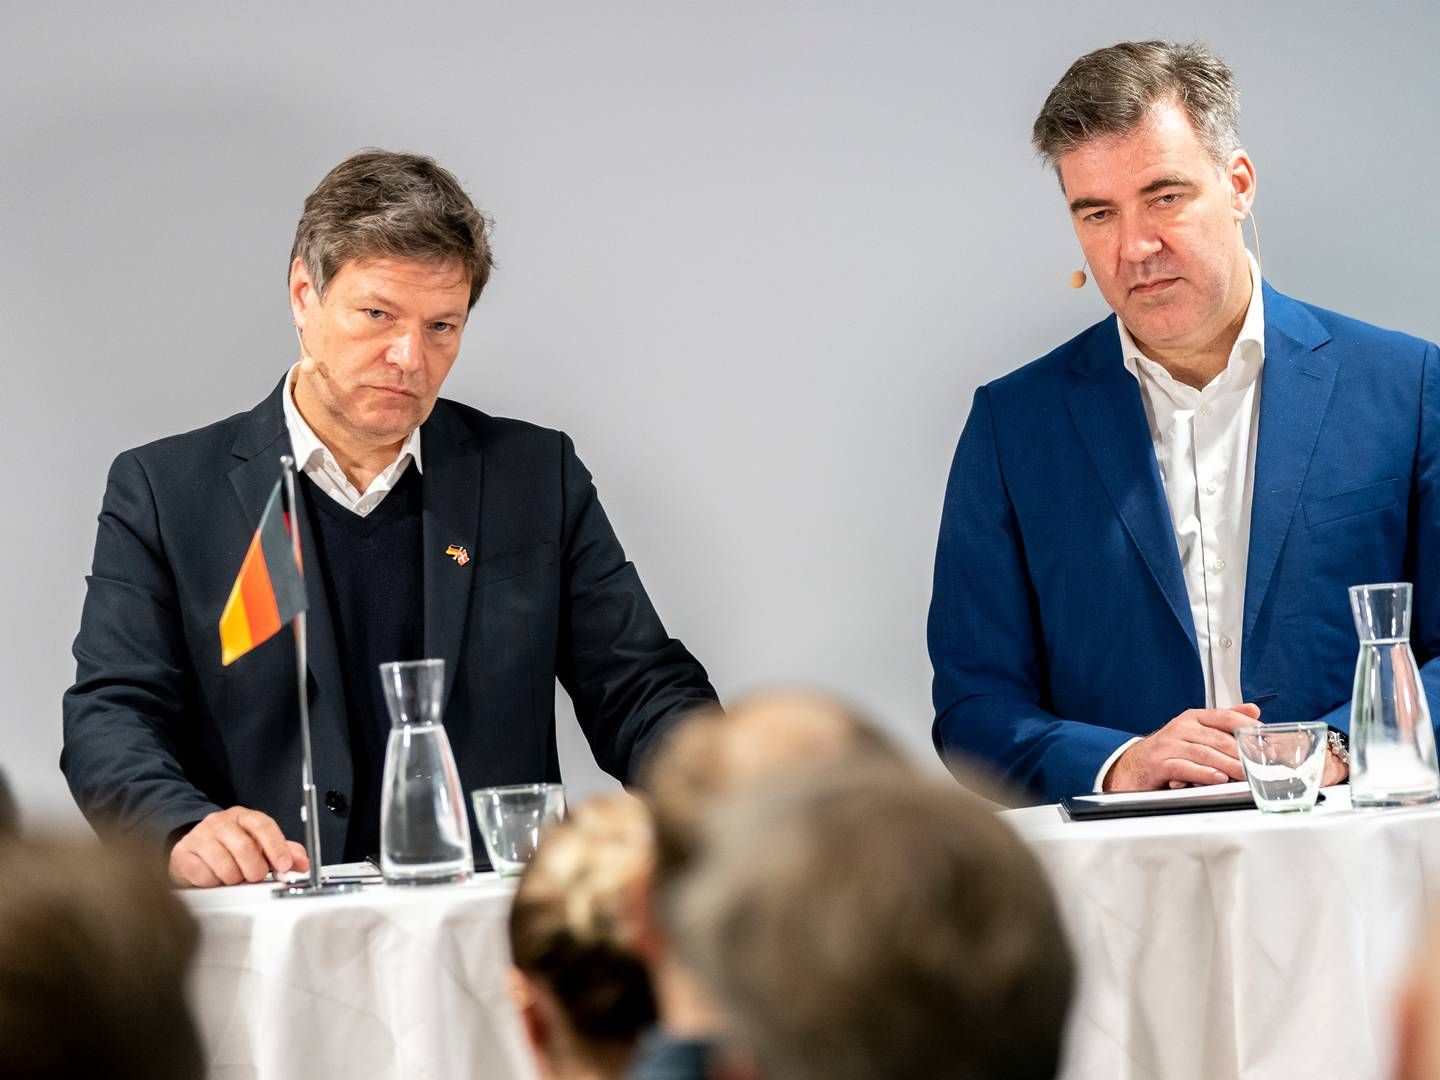 Danish energy minister Lars Aagaard and his German colleague Robert Habeck both see eye to eye on labelling nuclear power as a renewable or not. | Photo: Ida Marie Odgaard/Ritzau Scanpix